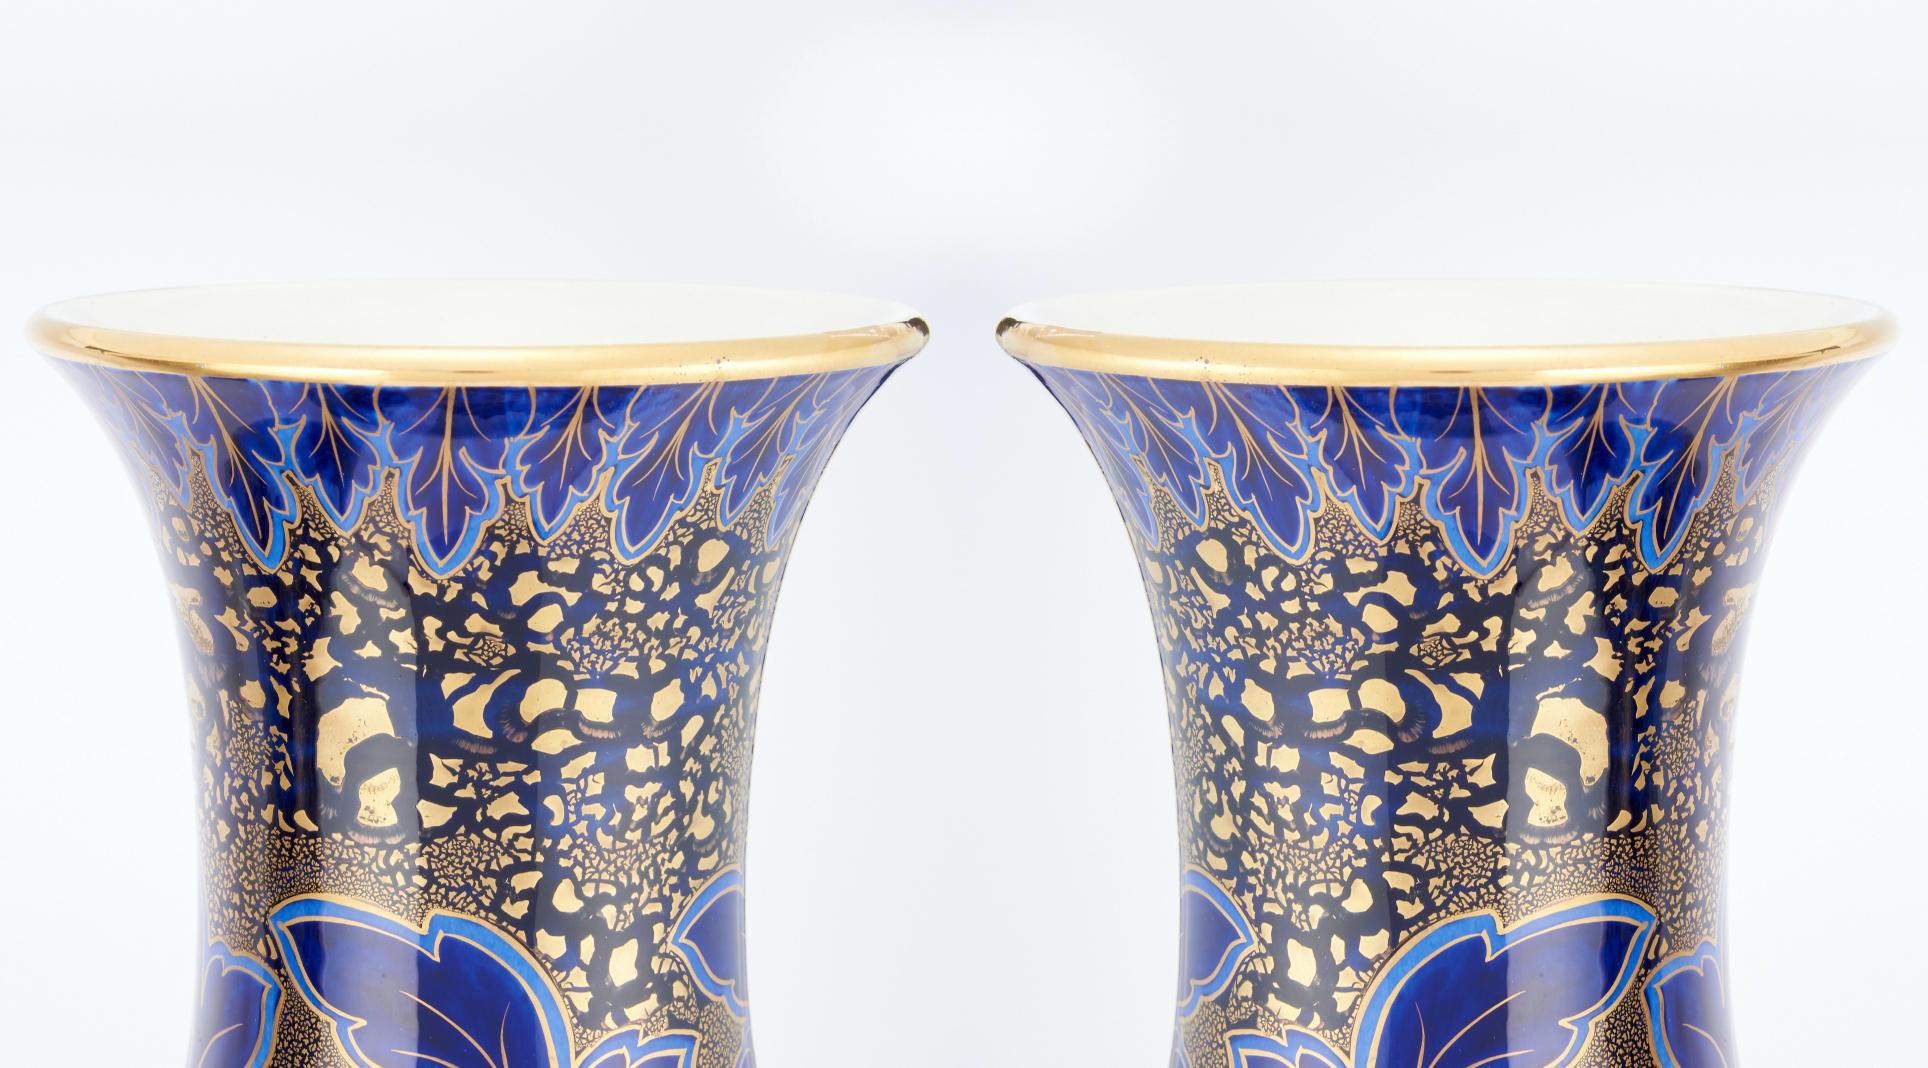 19th Century Large Art Nouveau Style Hand-Painted & Gilt Decorated Vases / Urns For Sale 2